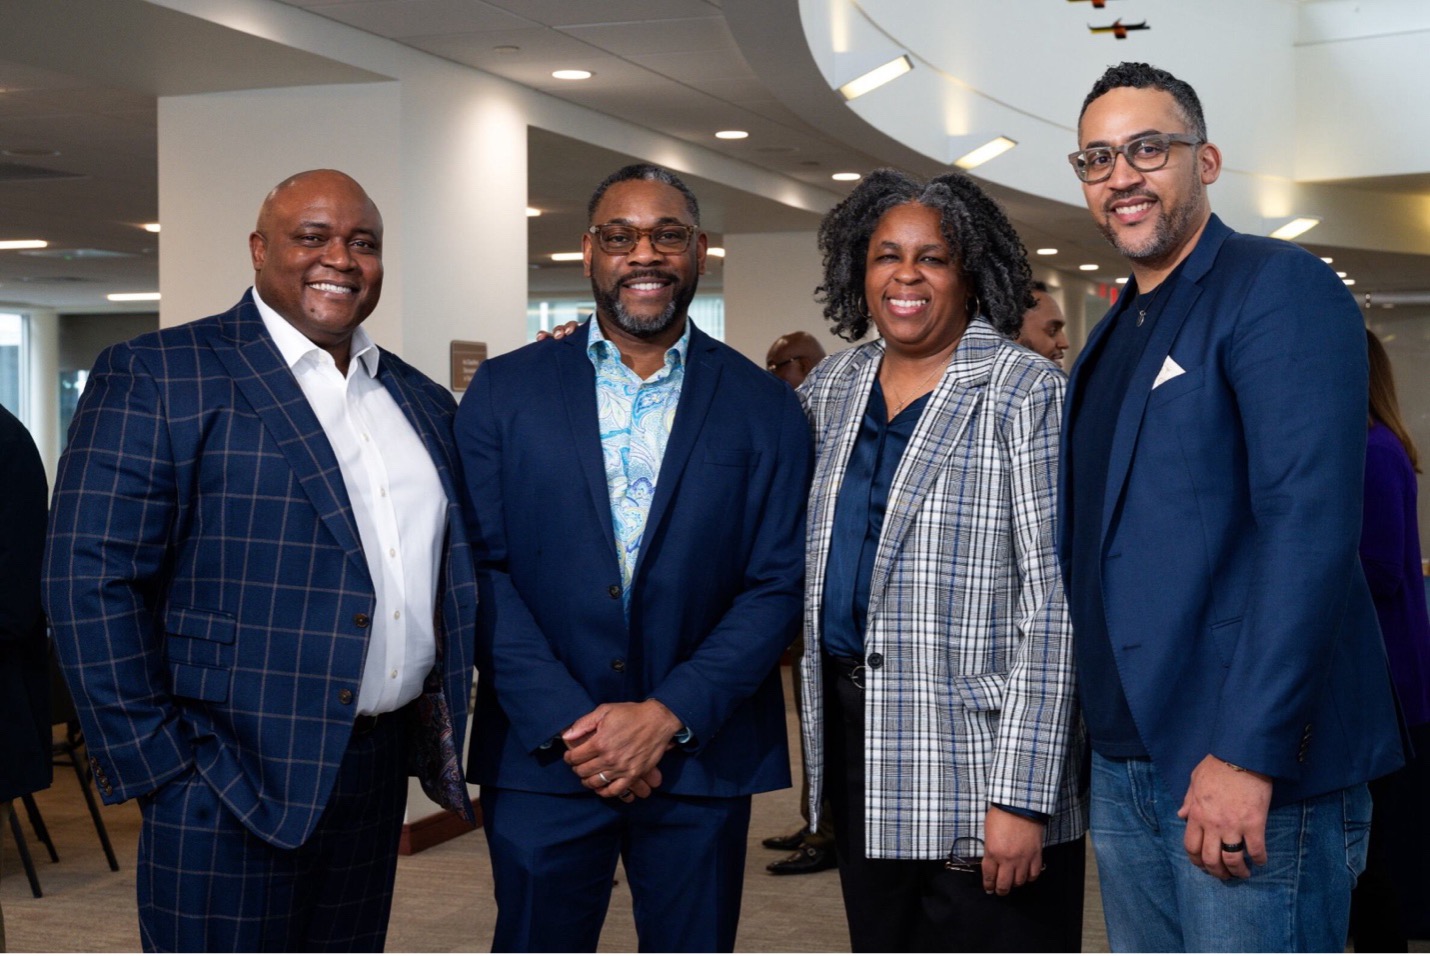 From left to right, Alexander Lupafya, Chief Diversity and Inclusion Officer, poses with BEACON co-chairs Gibbs, Agbasi-Porter, and Johnson.